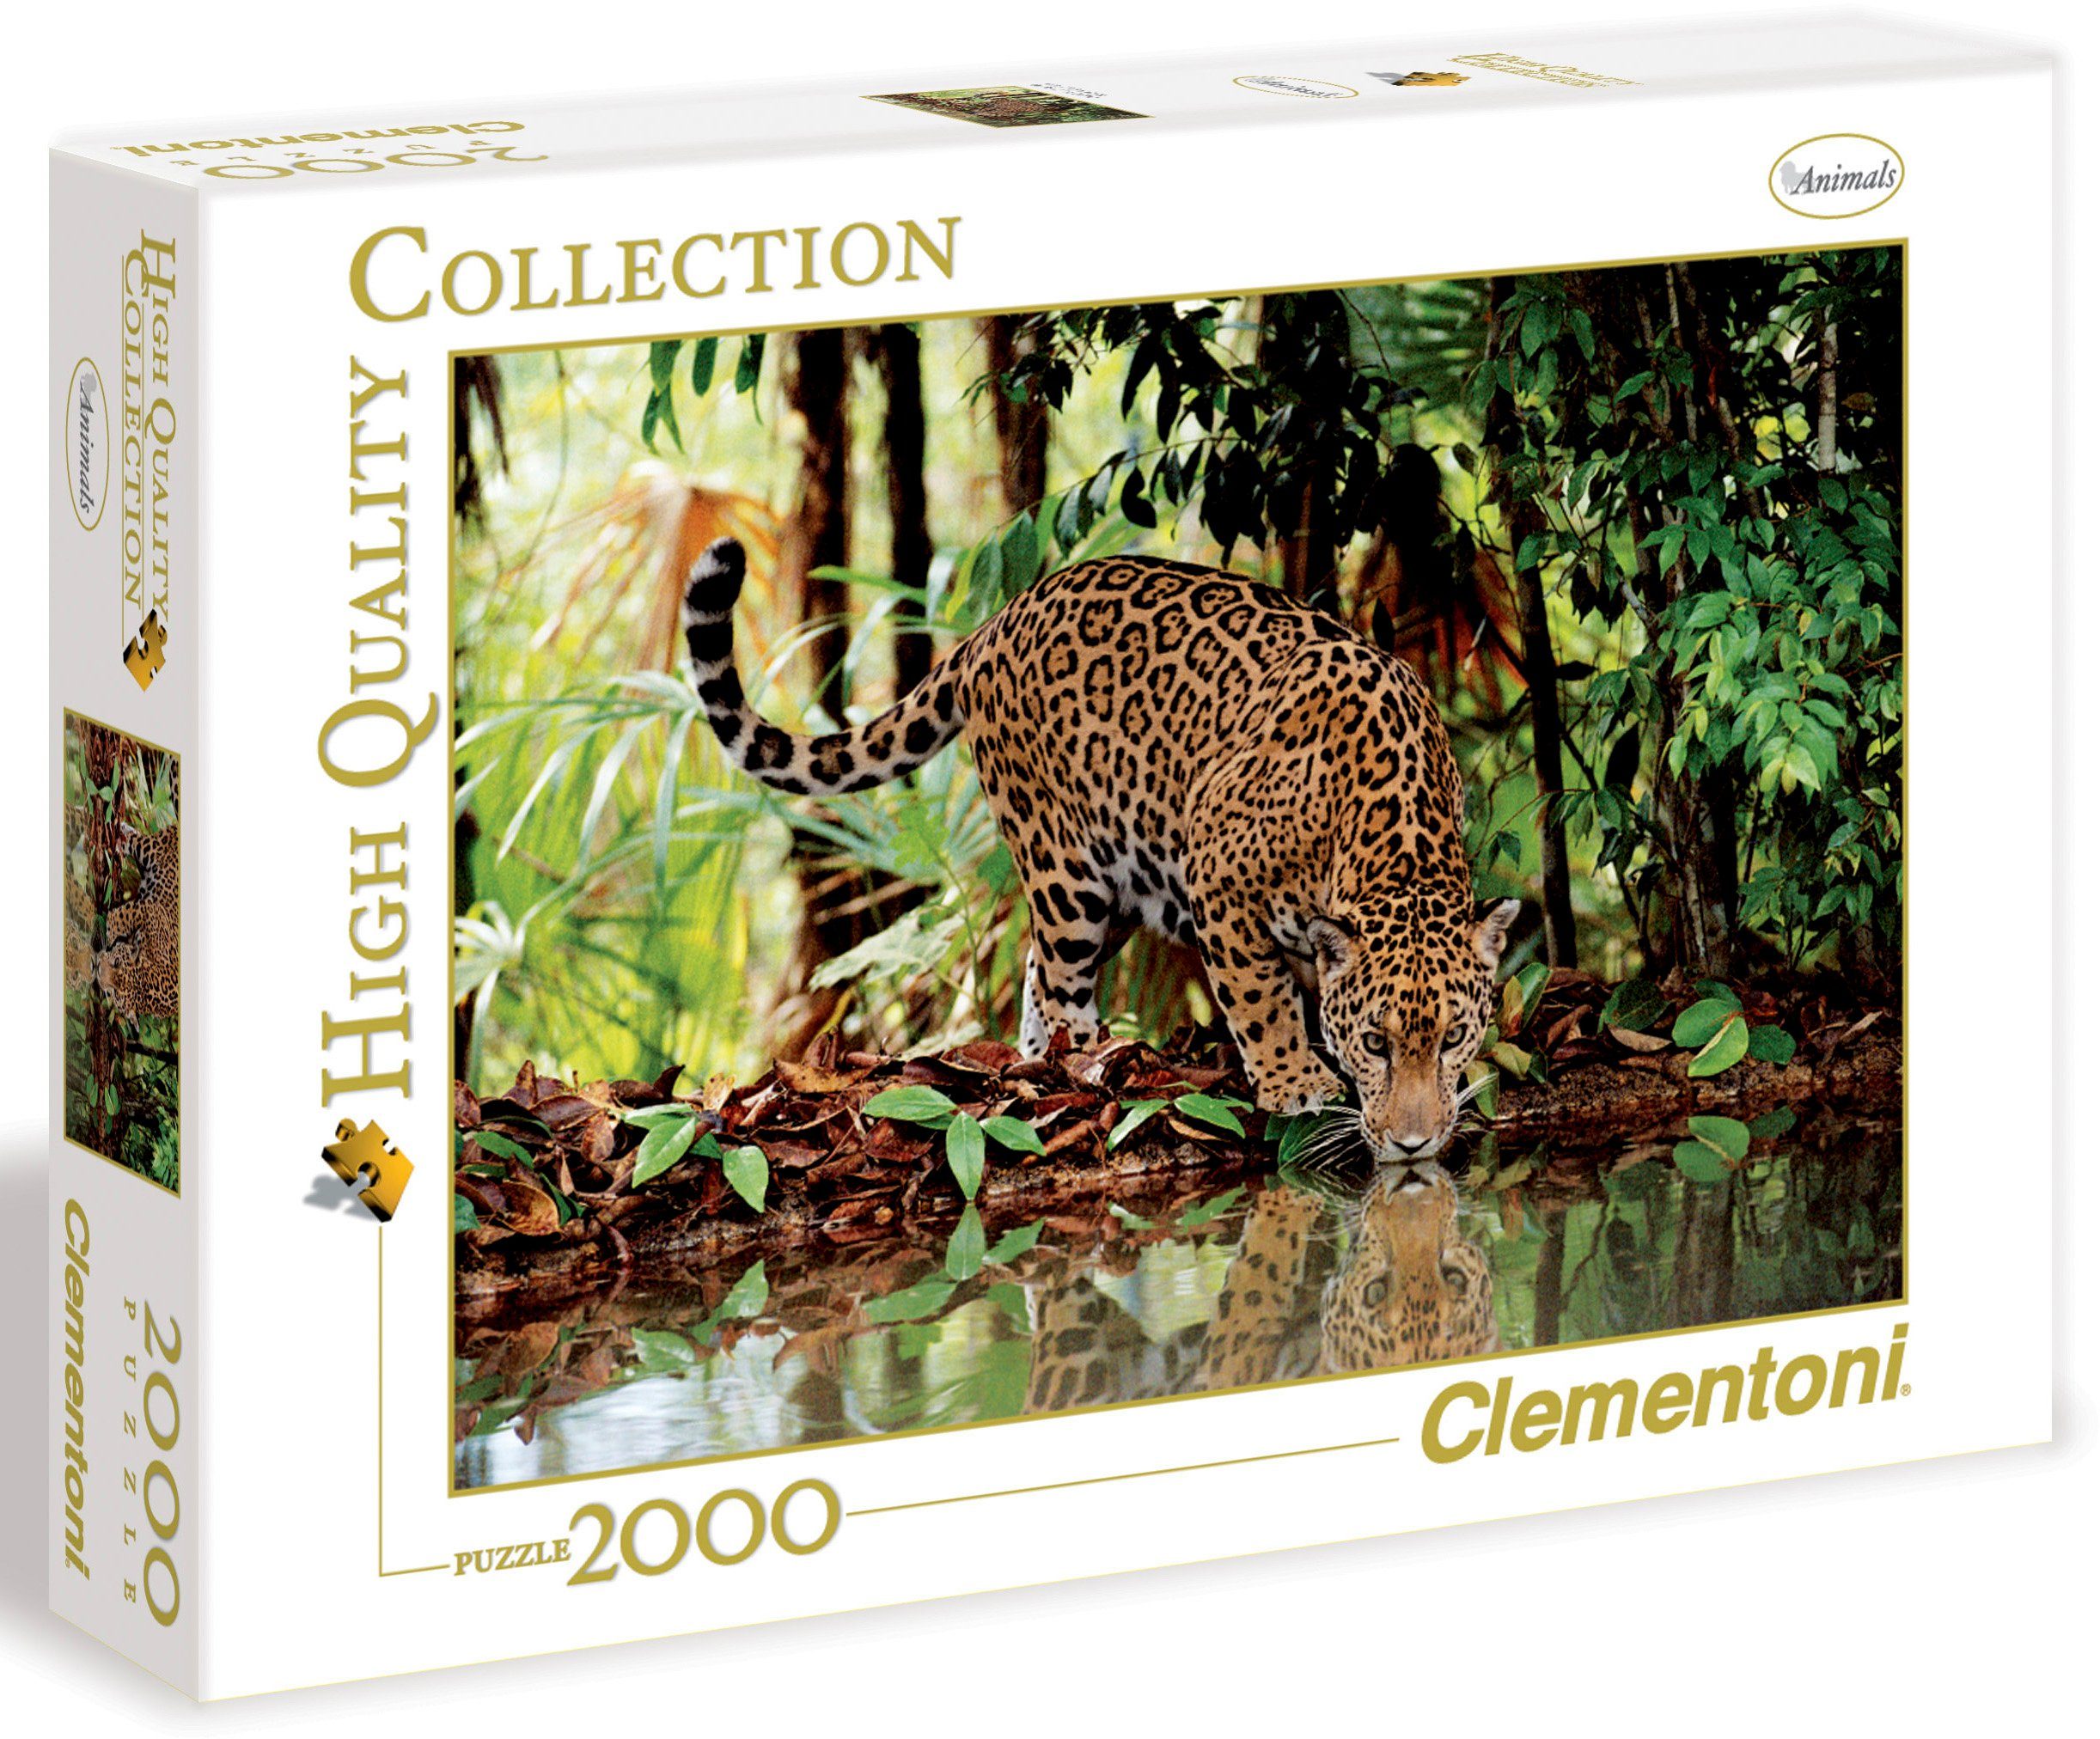 Puzzle Leopard, Quality Puzzleteile, Clementoni® Collection, High 2000 in Europe Made